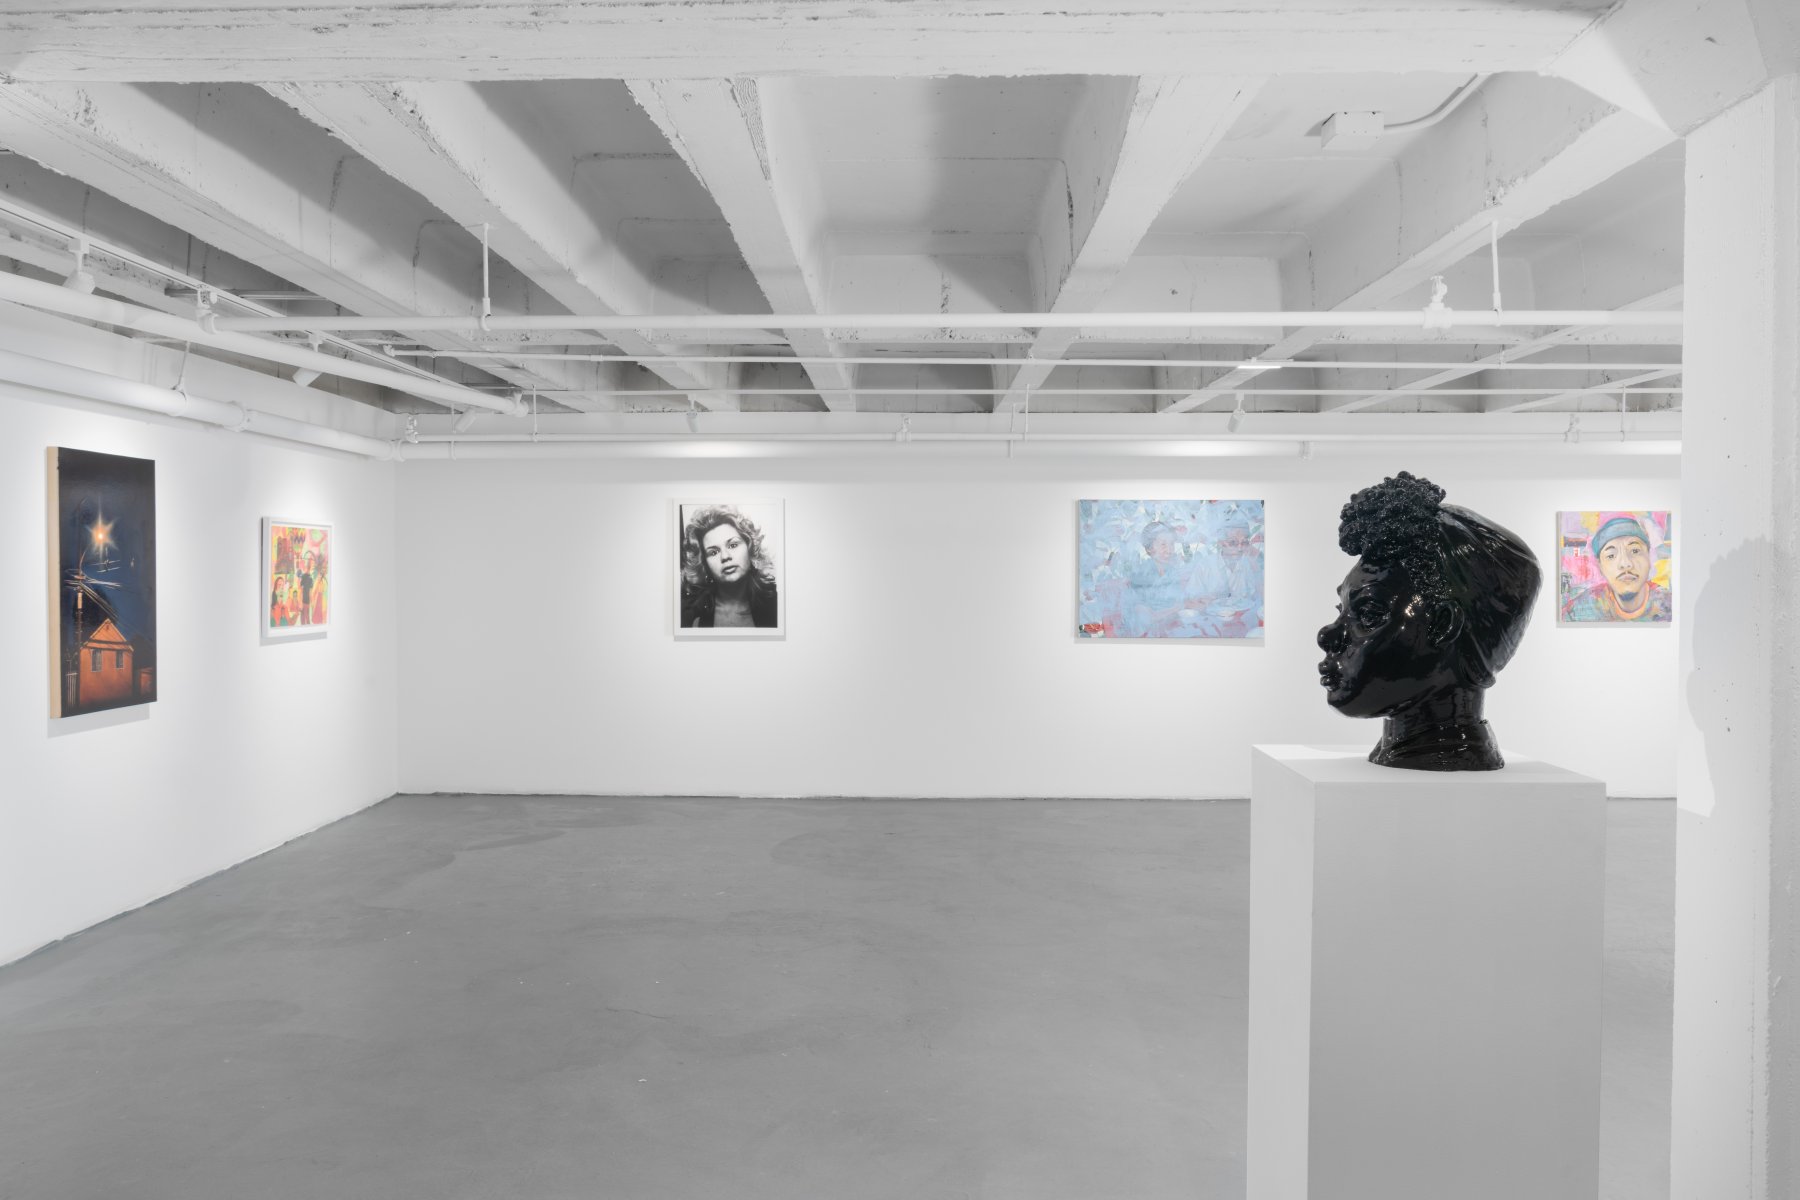 Installation image for Southland Vol. 2, at Charlie James Gallery